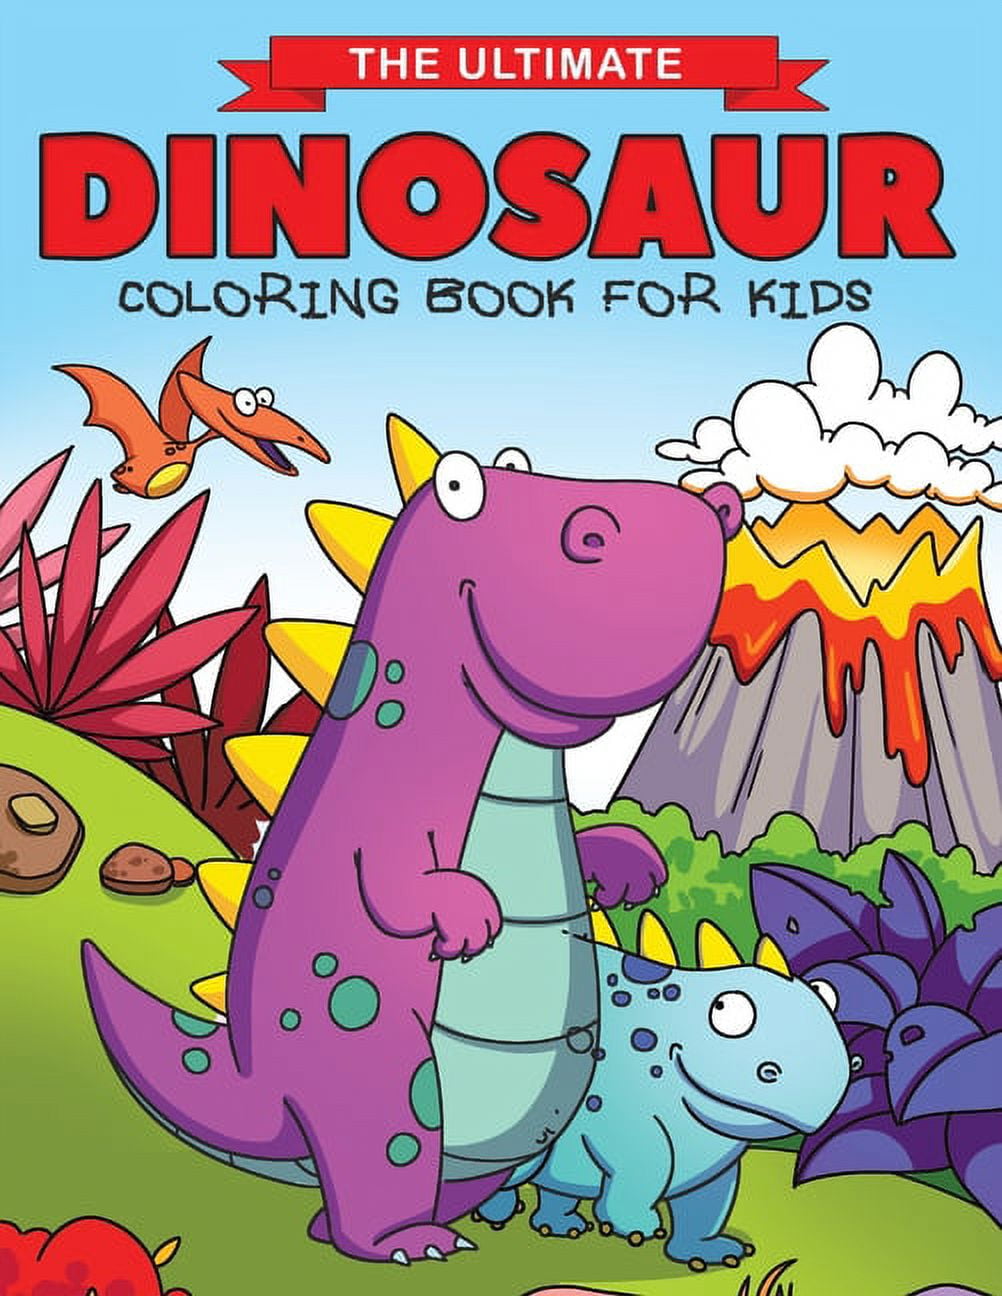 dinosaur coloring book for 5 year old: coloring book,8.5''x11'', dinosaur coloring  books for kids ages 8-12, dinosaur coloring books for kids ages 6-1  (Paperback)